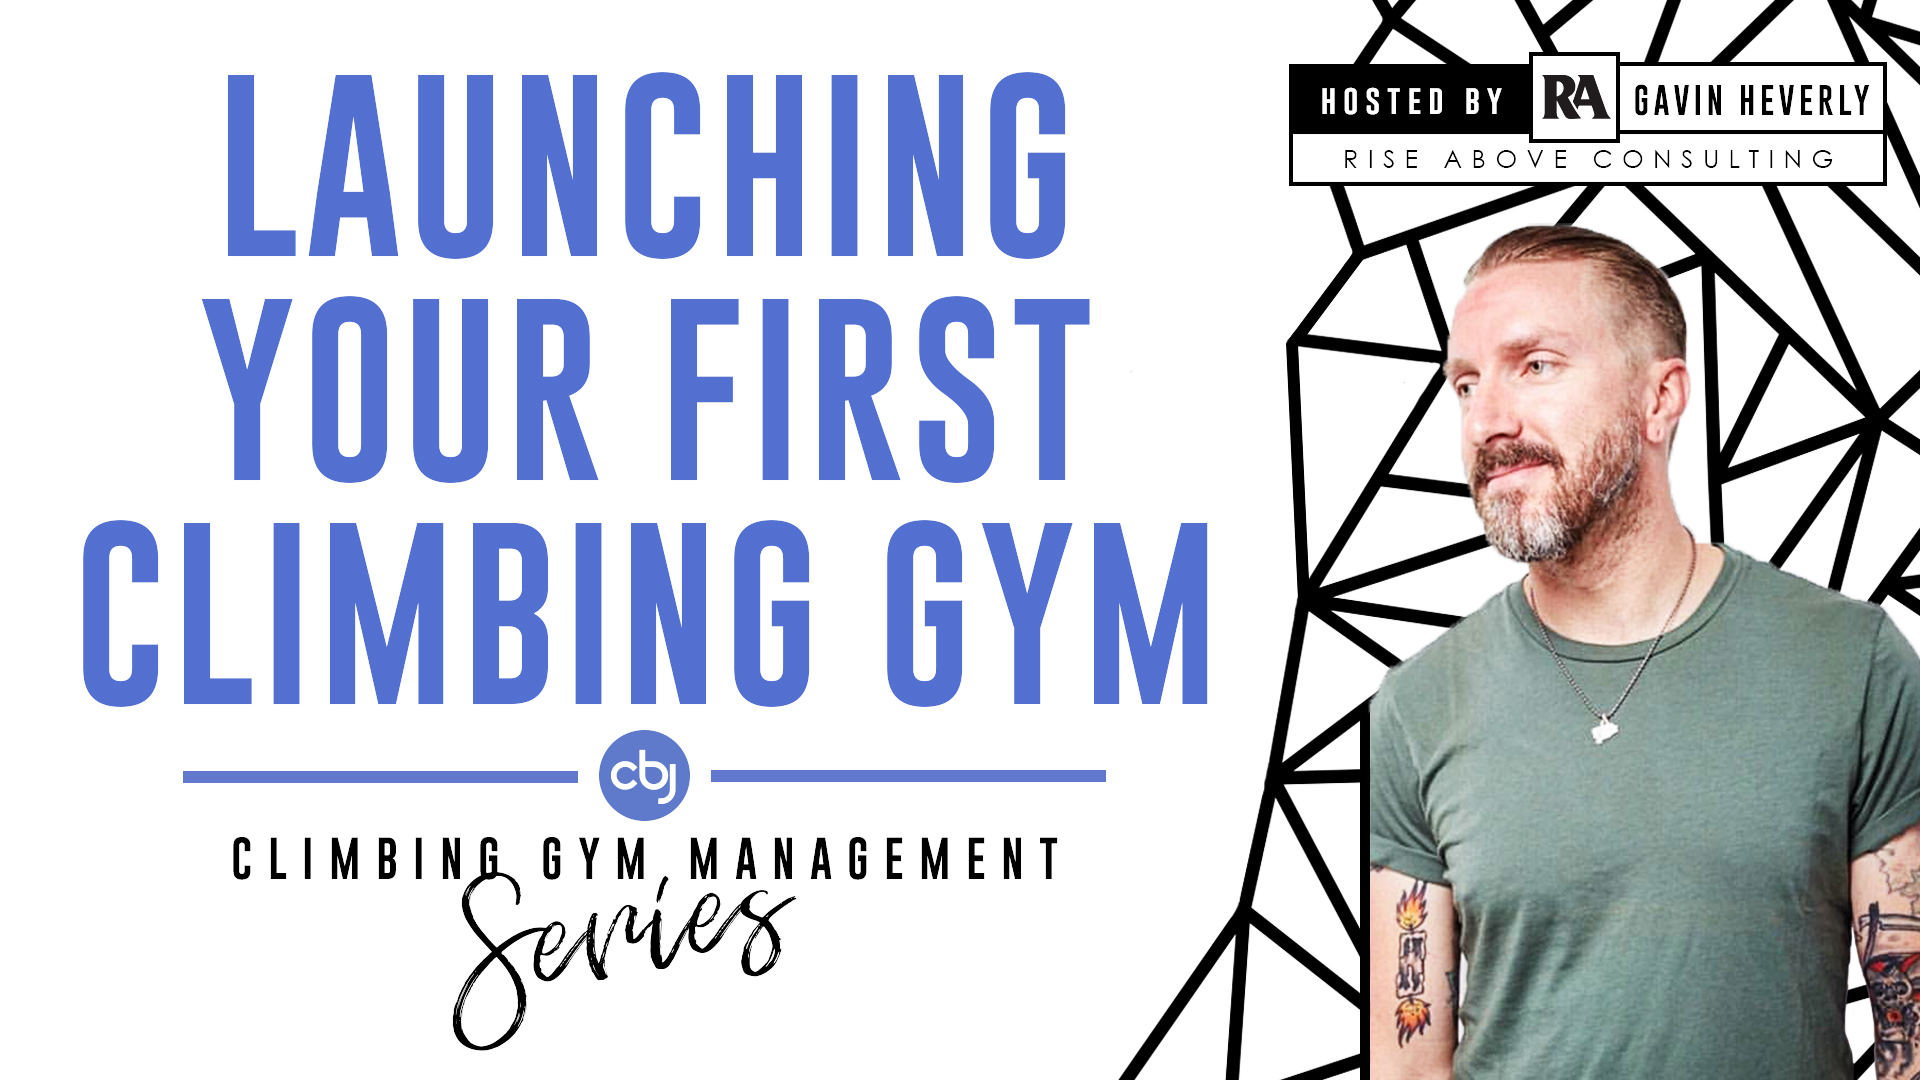 Launching Your First Climbing Gym - Climbing Gym Management Series